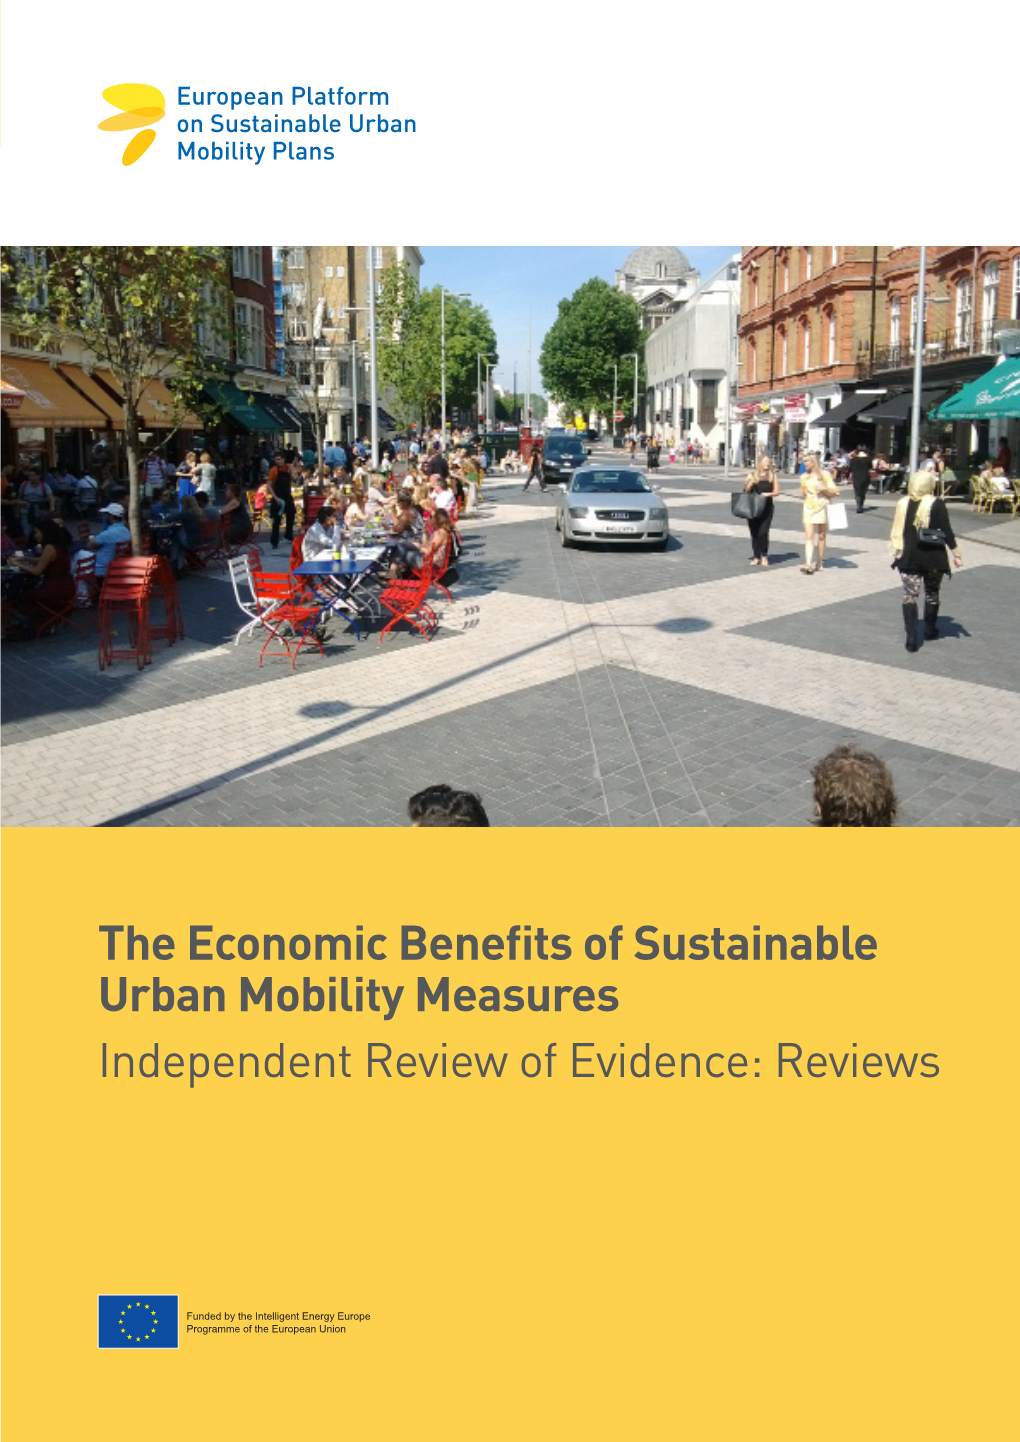 The Economic Benefits of Sustainable Urban Mobility Measures Independent Review of Evidence: Reviews